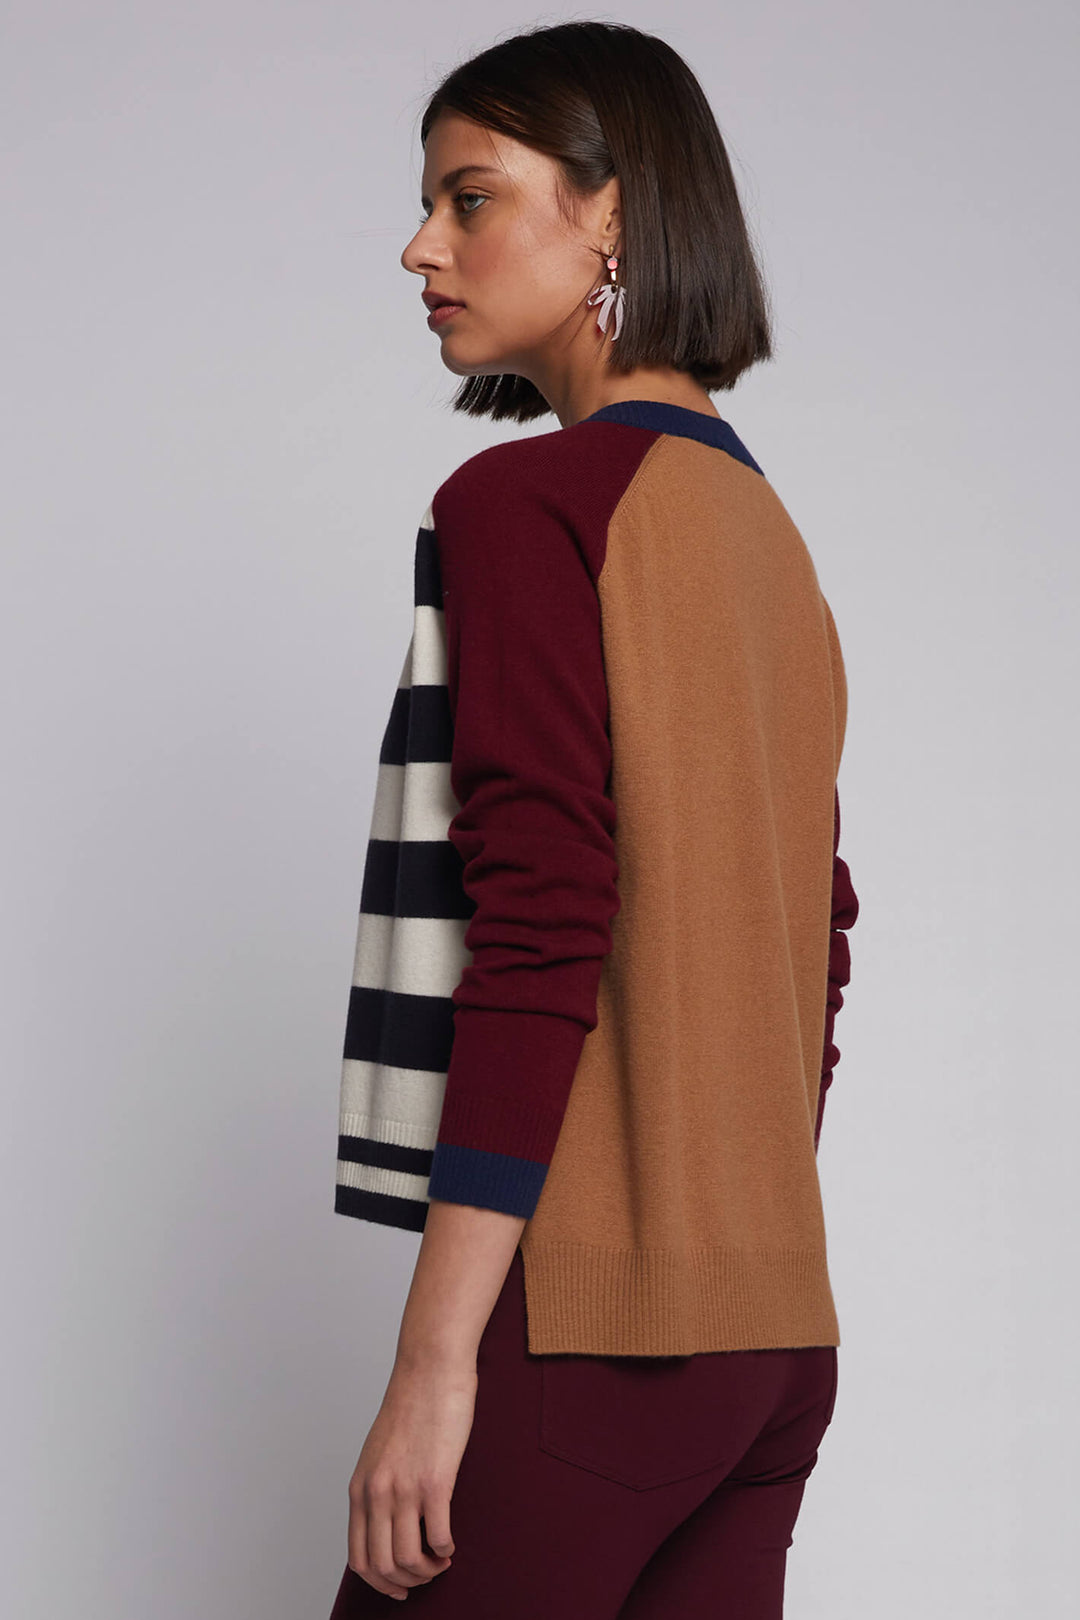 Vilagallo 30476 Alina Bordeaux Stripes Kitted Cardigan - Experience Boutique